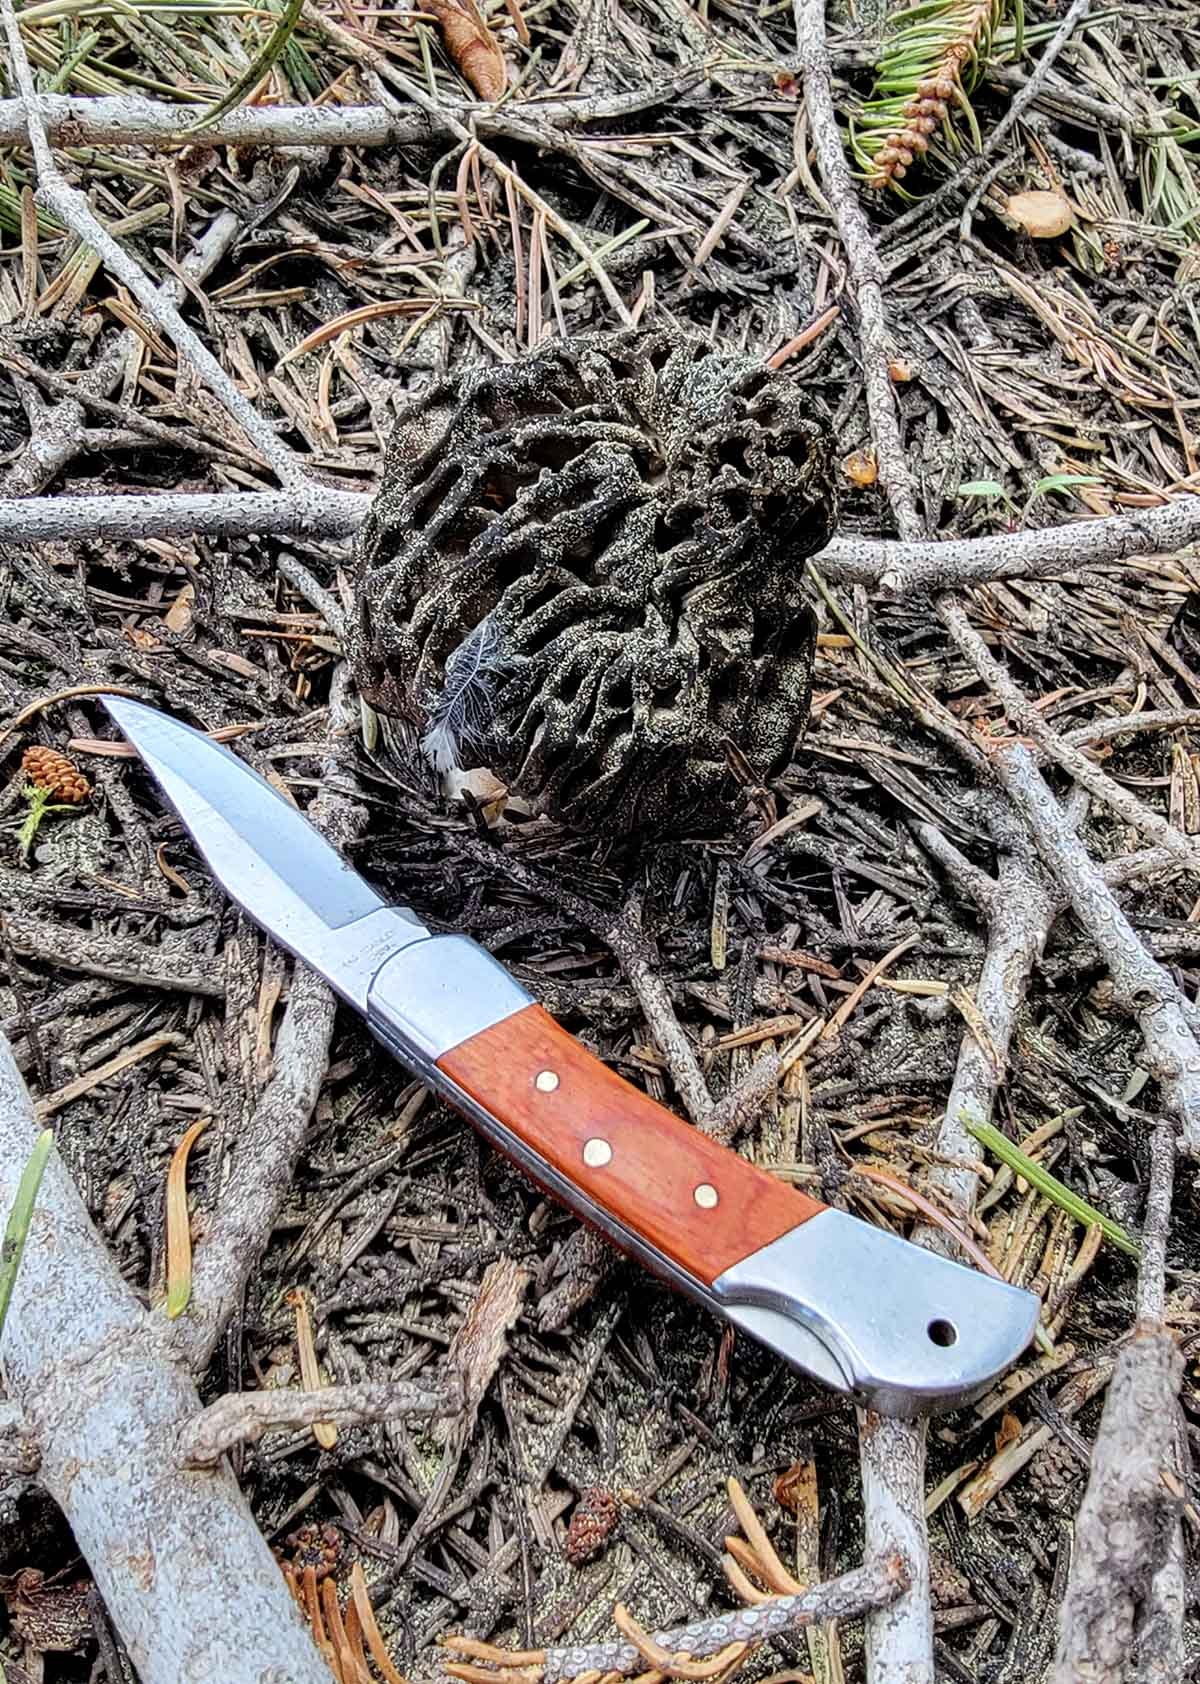 A burn morel with my pocket knife nearby.